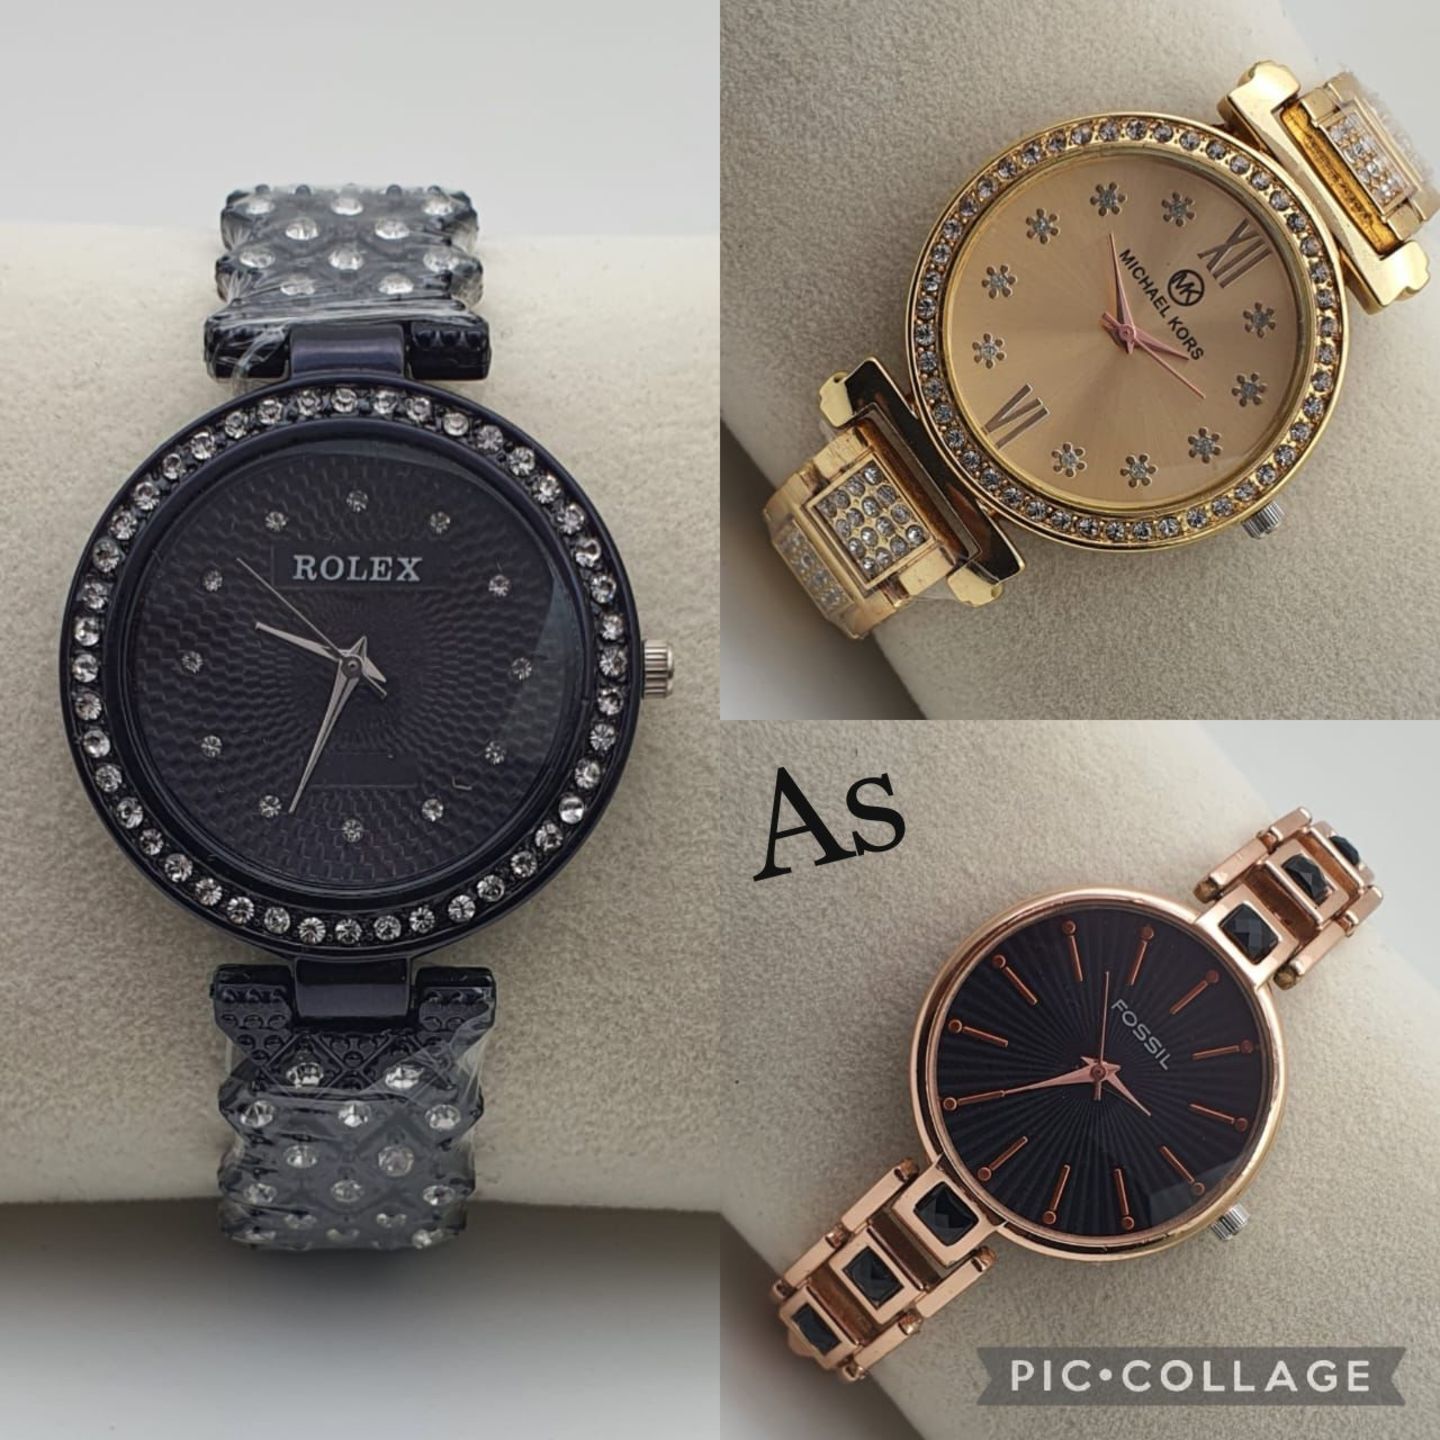 Ladies Micheal Kors,fossil, rolexCombo Watch Gift Engagement, anniversary, valentines day, mothers day for sister, wife,friend,mother, baby shower